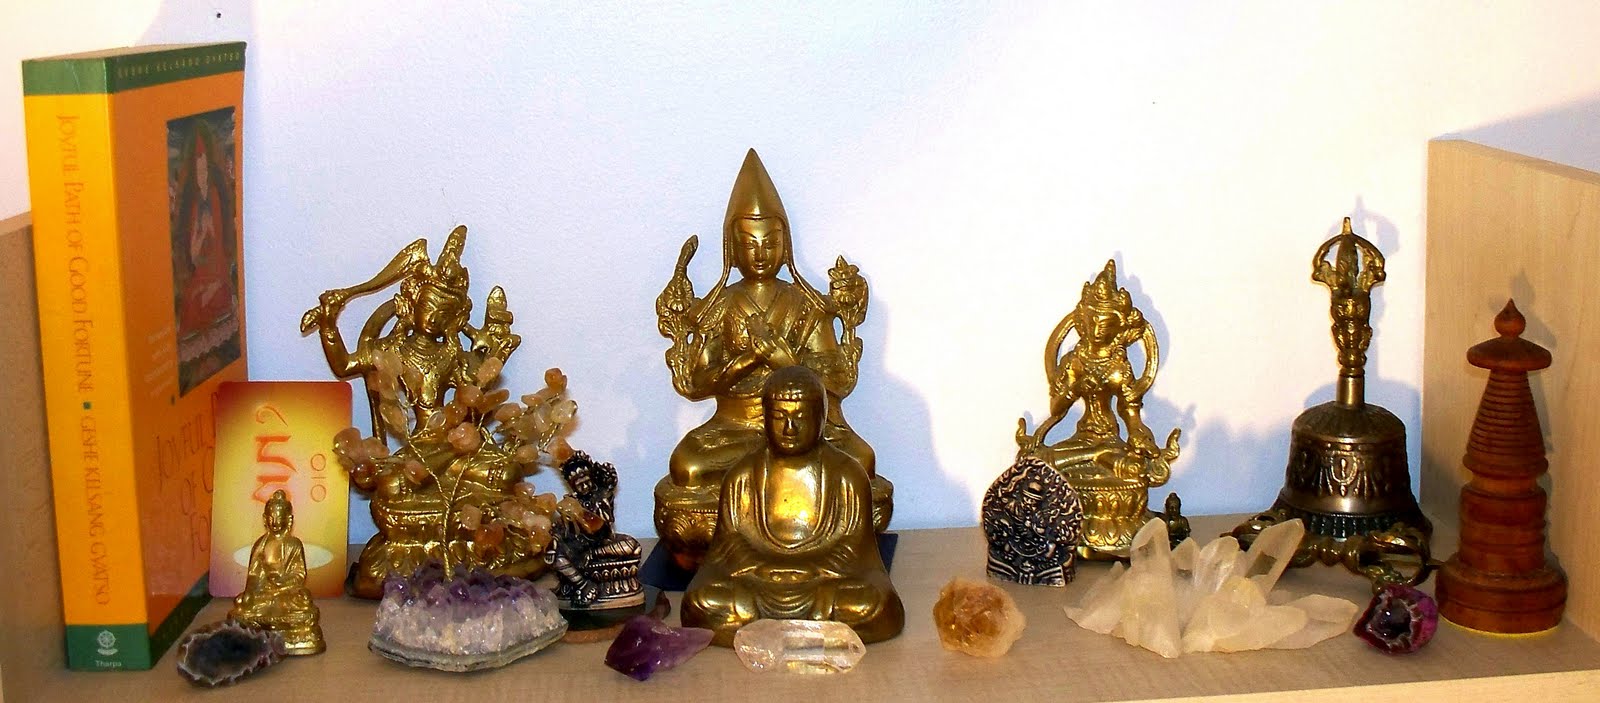 Transcultural Buddhism: Offering Crystals on Buddhist Shrines